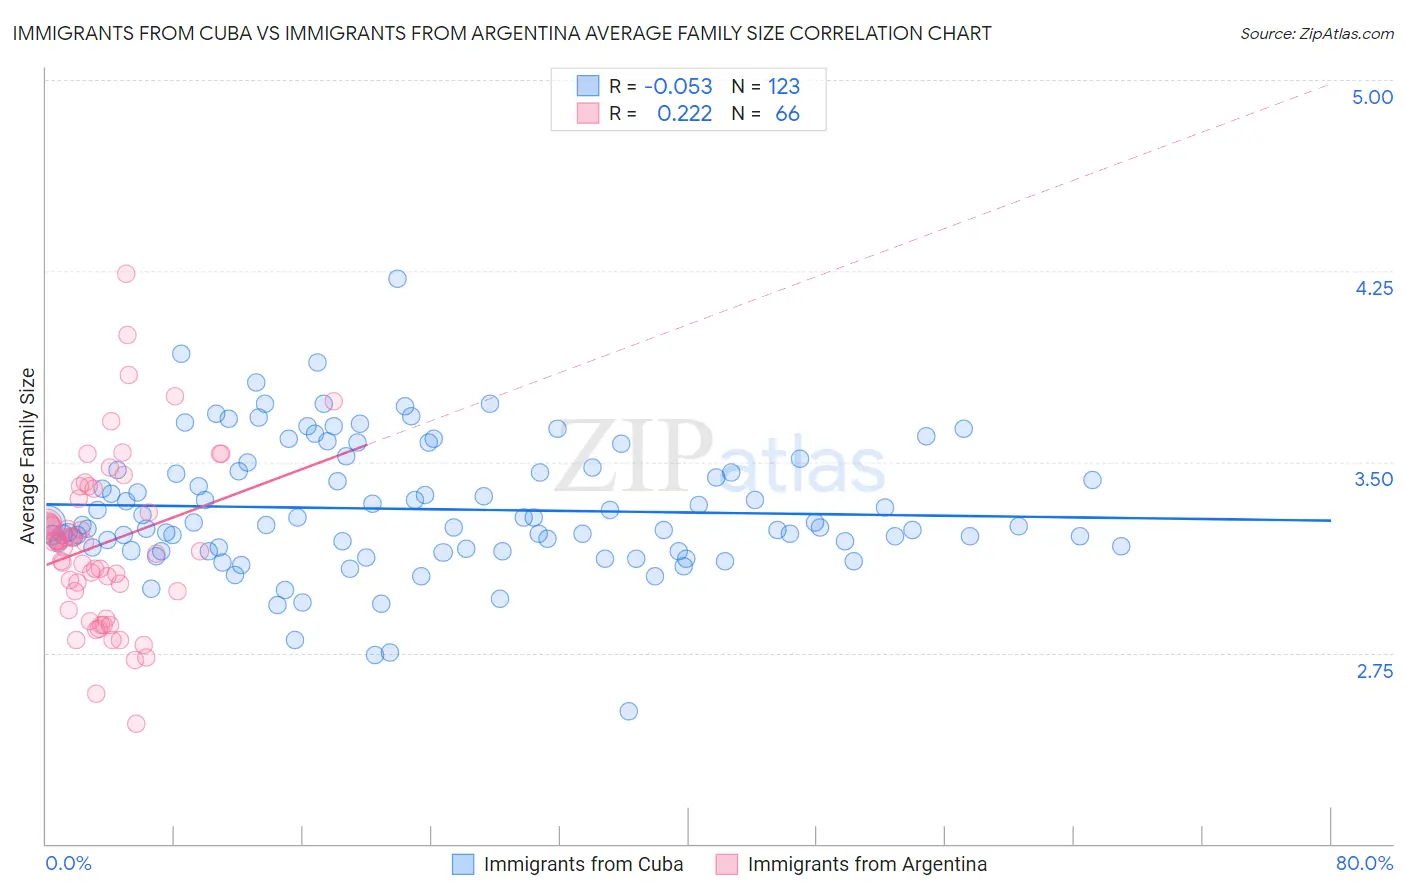 Immigrants from Cuba vs Immigrants from Argentina Average Family Size